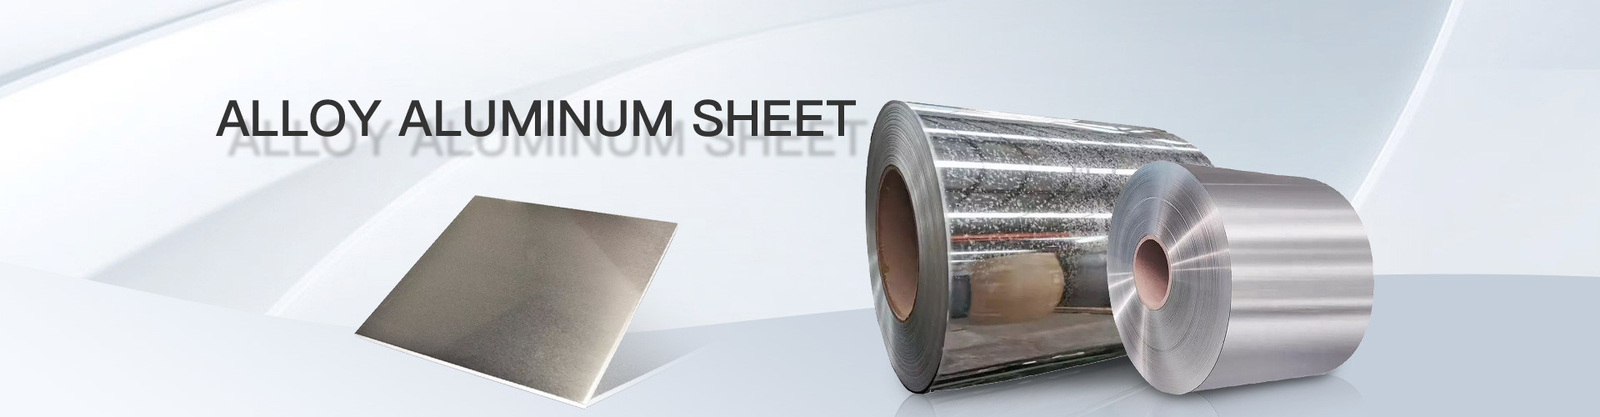 quality Stainless Steel Sheets factory